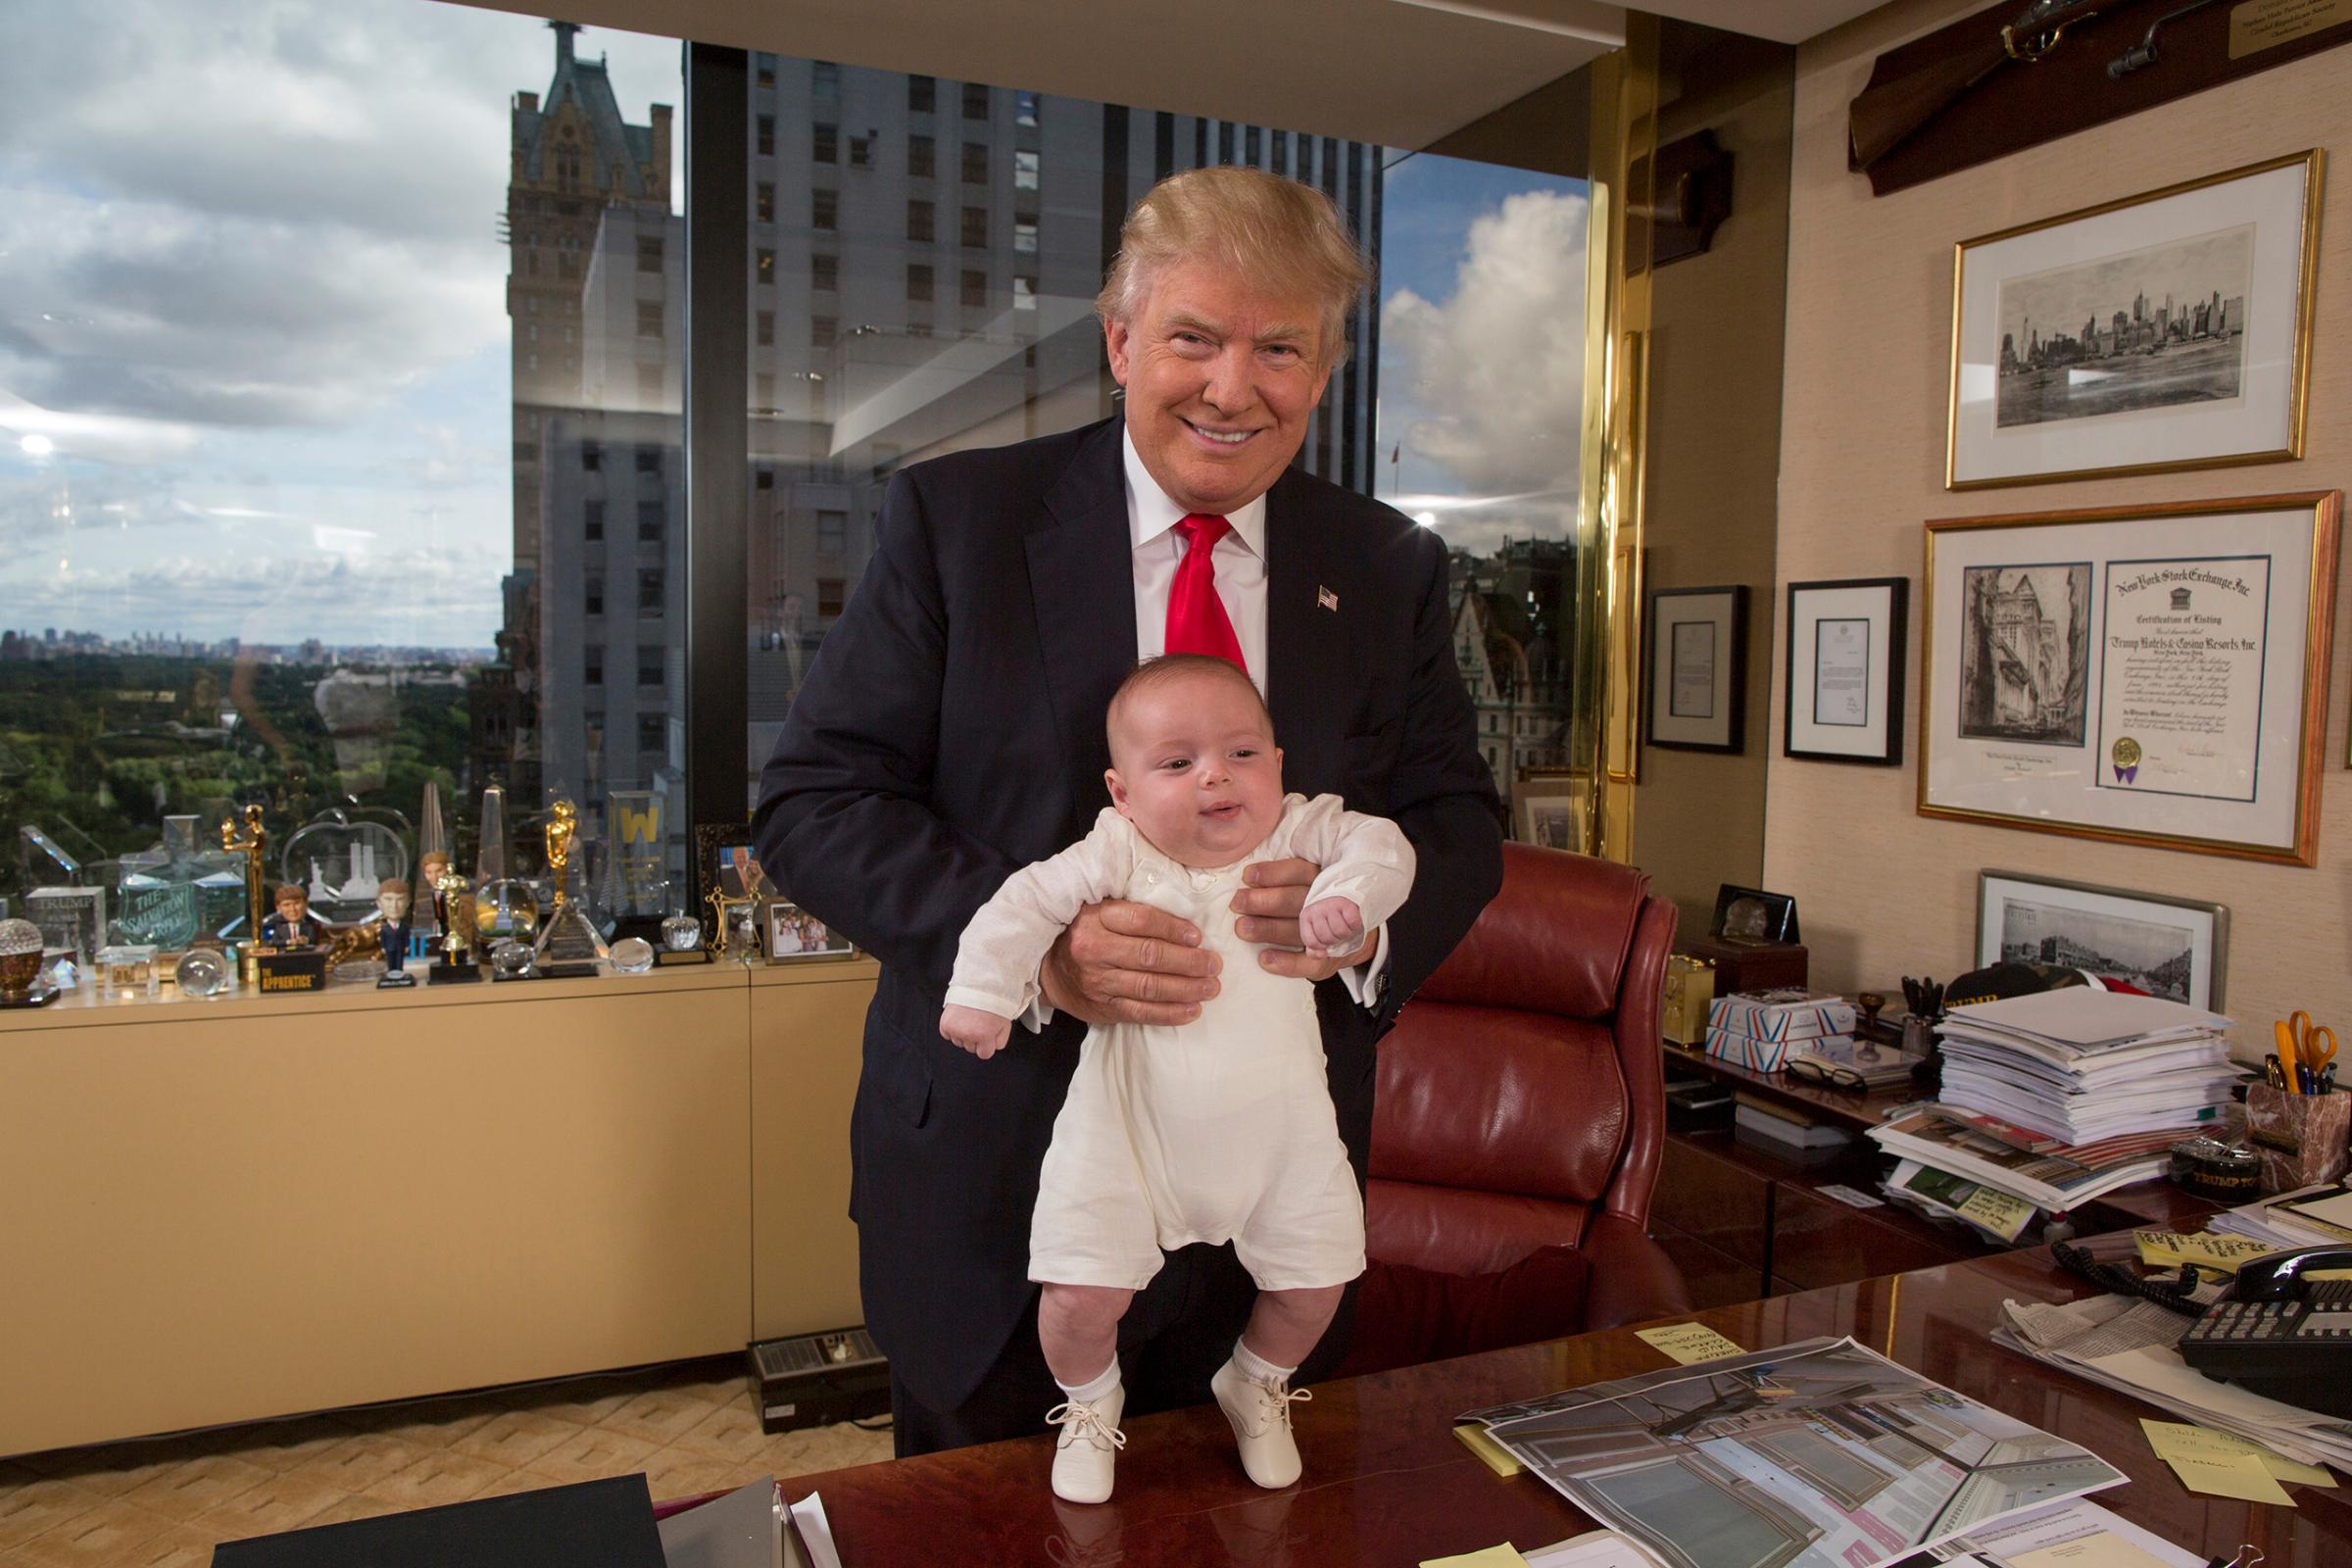 Republican presidential candidate Donald Trump with his grandson Theodore James in Trump’s office in New York City on July 11, 2016.